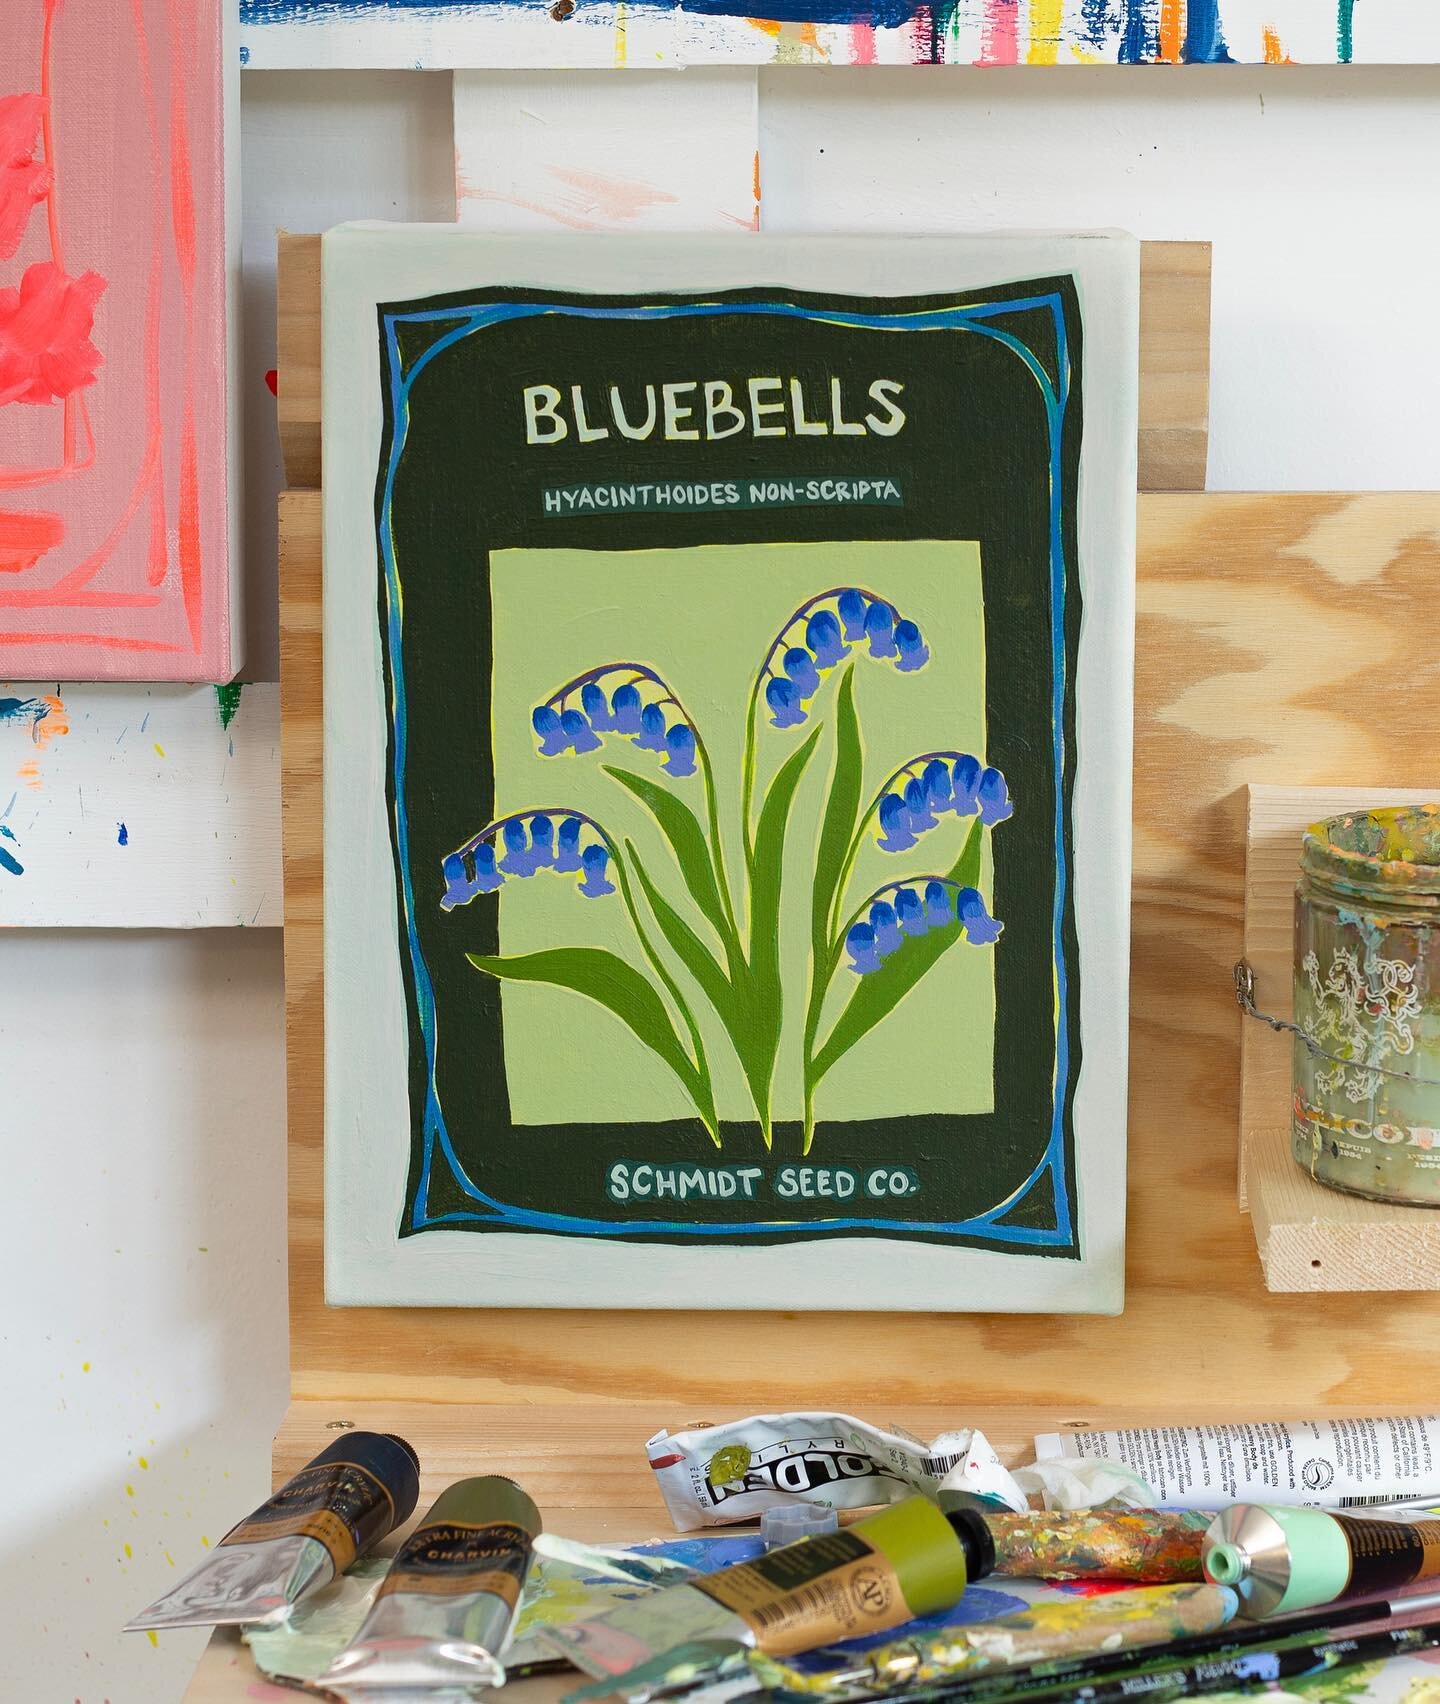 Working on some seed packets and only slightly regretting choosing a canvas this small with all the text I&rsquo;m going to have to paint. What&rsquo;s in your garden this spring- what seeds should I paint next?